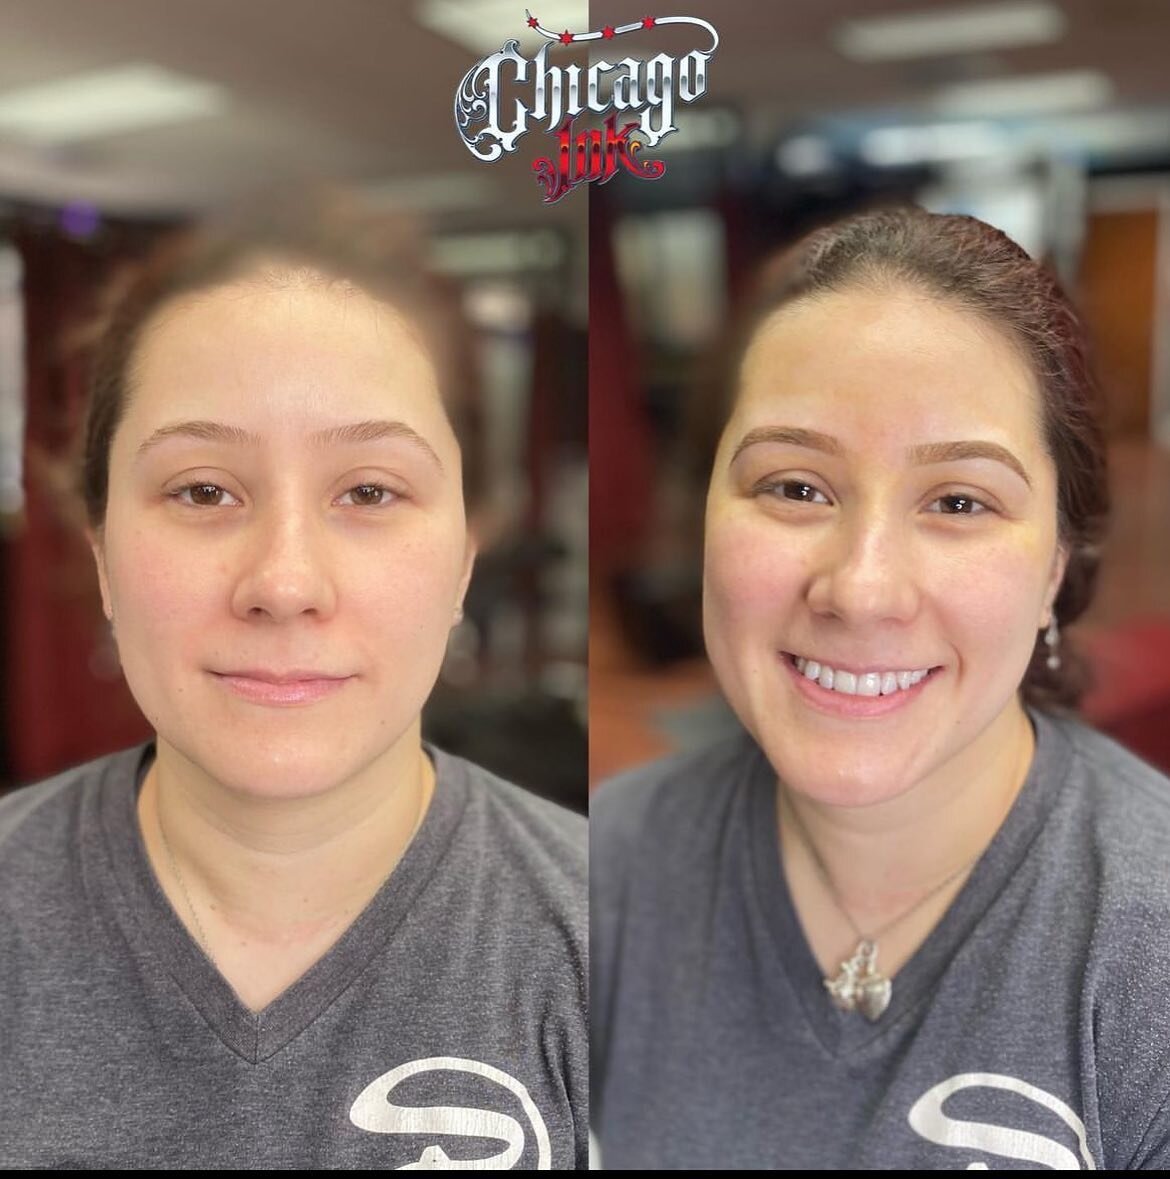 Gorgeous!😍😍
.
.
.
Service: powder Brows
Artist: @ombrowschicago 
Pigment: @permablend_pigments x @tinadaviesprofessional 
Cost: $450
Location: 3200 N Milwaukee Ave. Chicago, IL
Services, Pre/Post Care, &amp; Booking can be found in my bio.
.
.
.
#p